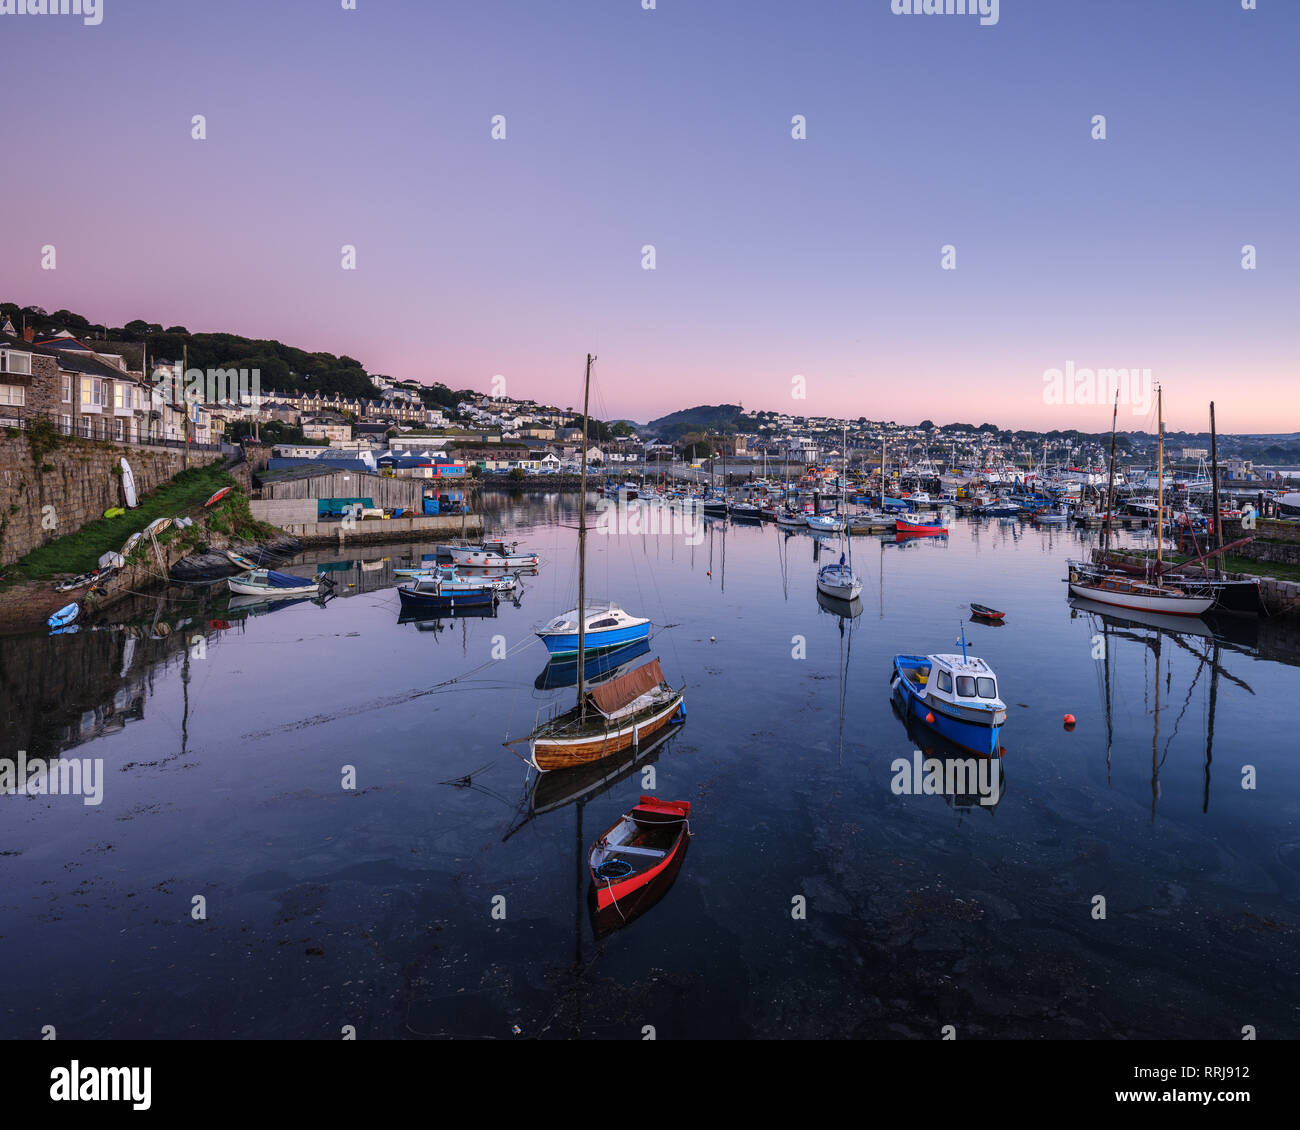 Twilight looking across the inner harbours at the fishing port of Newlyn, Cornwall, England, United Kingdom, Europe Stock Photo